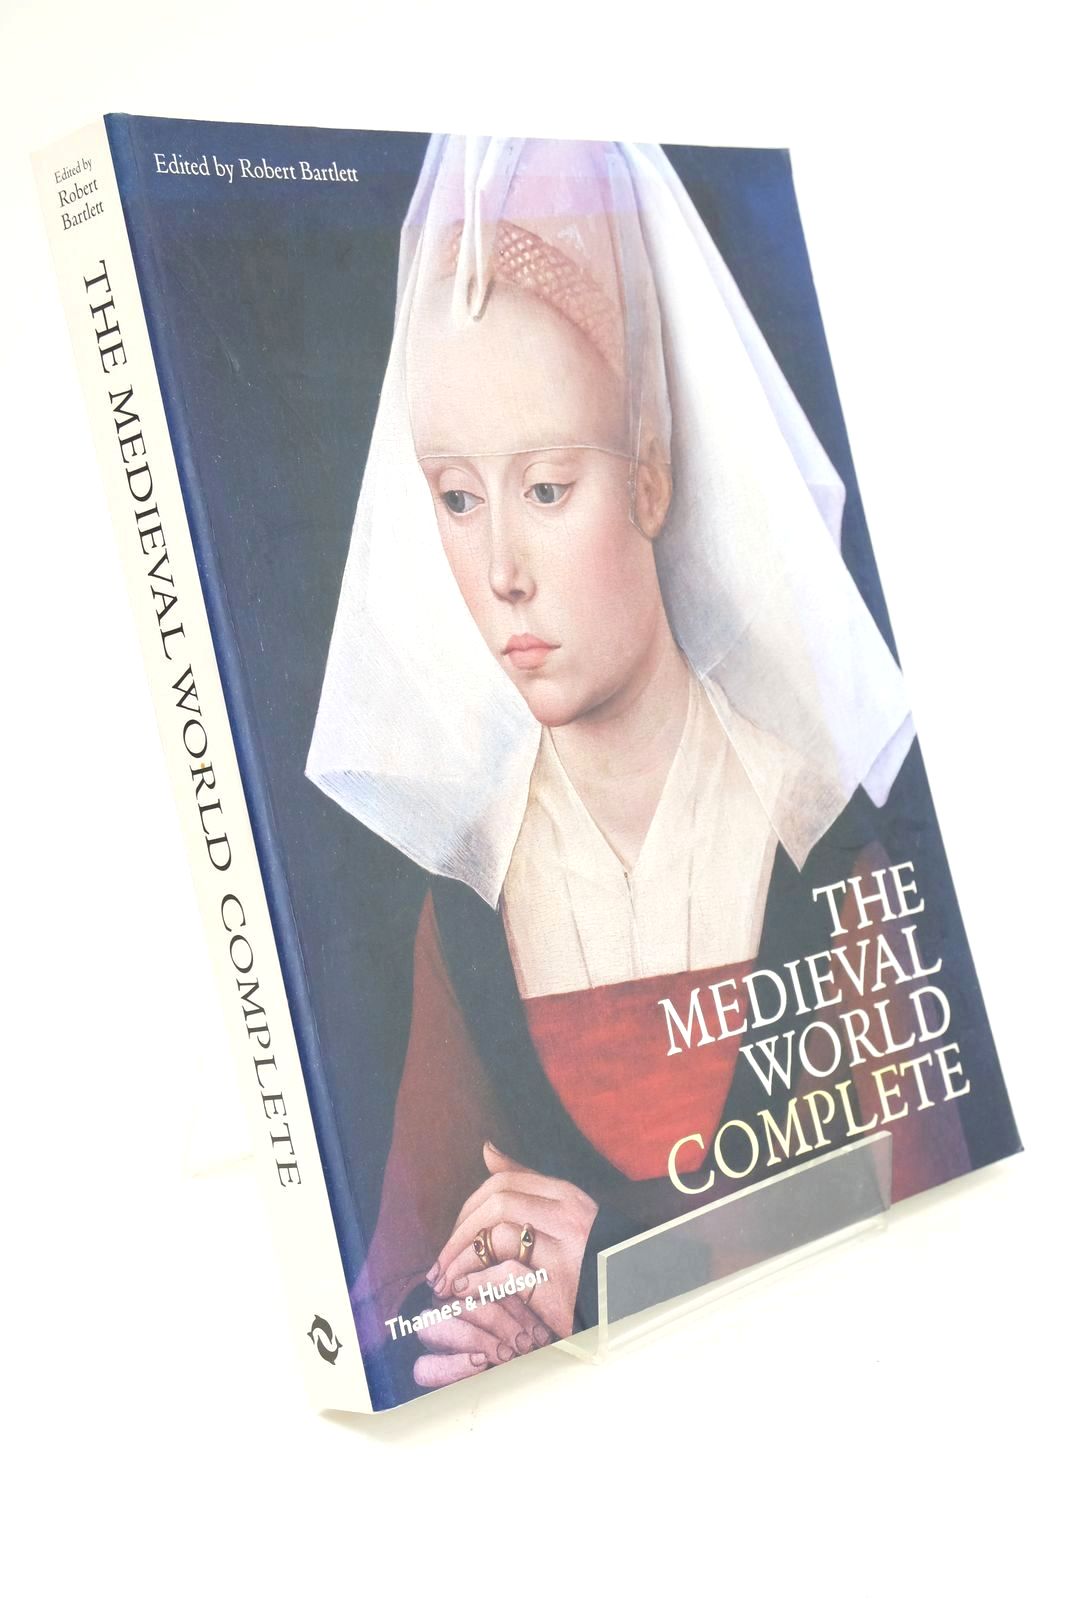 Photo of THE MEDIEVAL WORLD COMPLETE written by Bartlett, Robert published by Thames and Hudson (STOCK CODE: 1325294)  for sale by Stella & Rose's Books